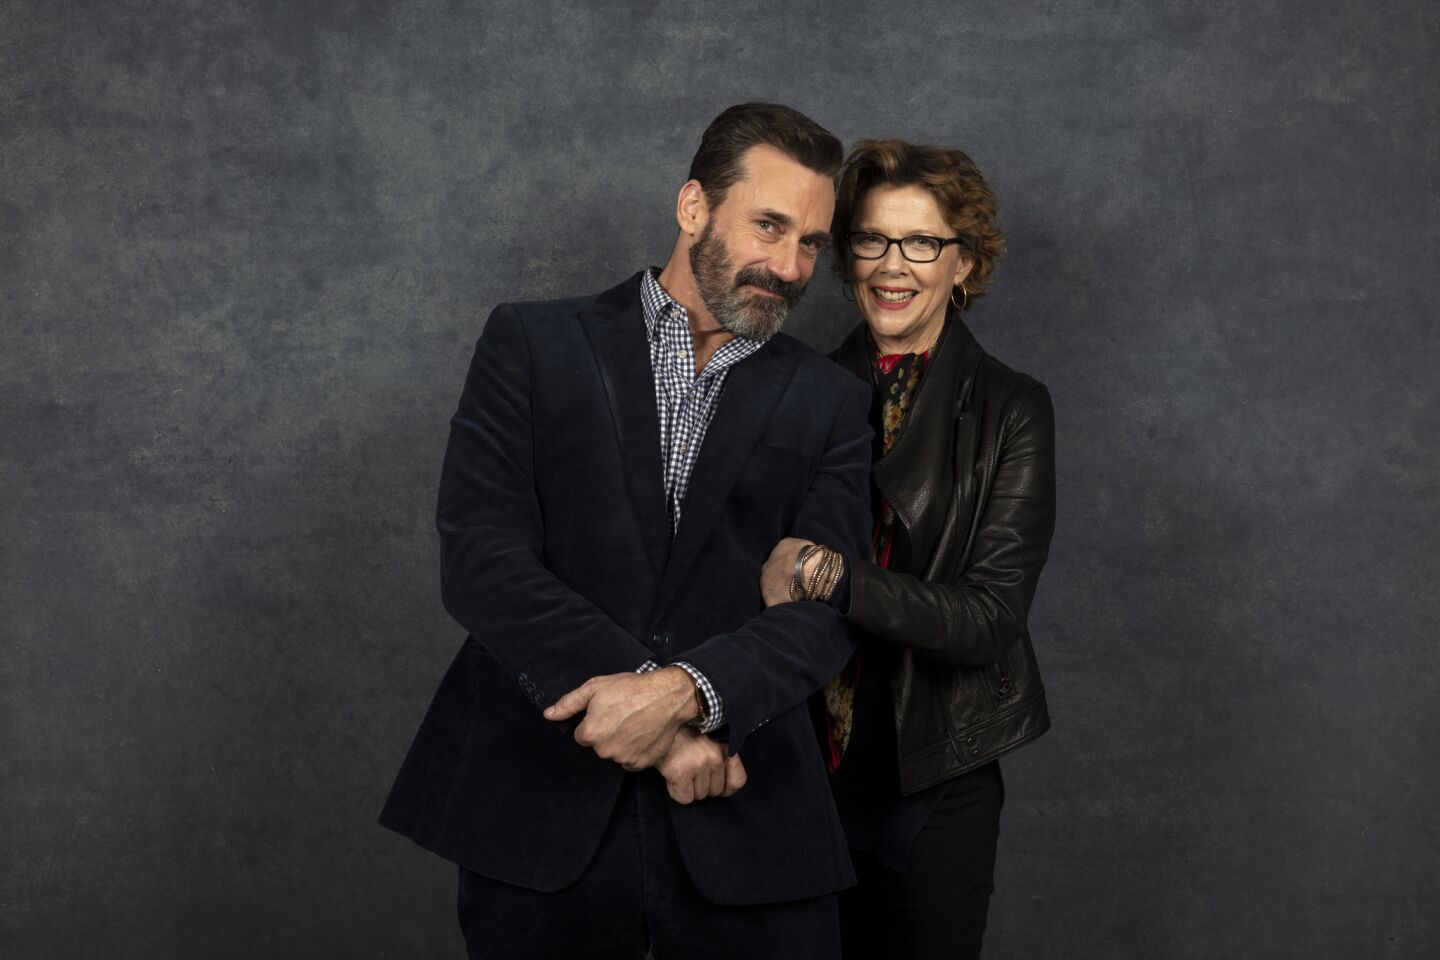 Actors Jon Hamm and Annette Bening from the film "The Report."